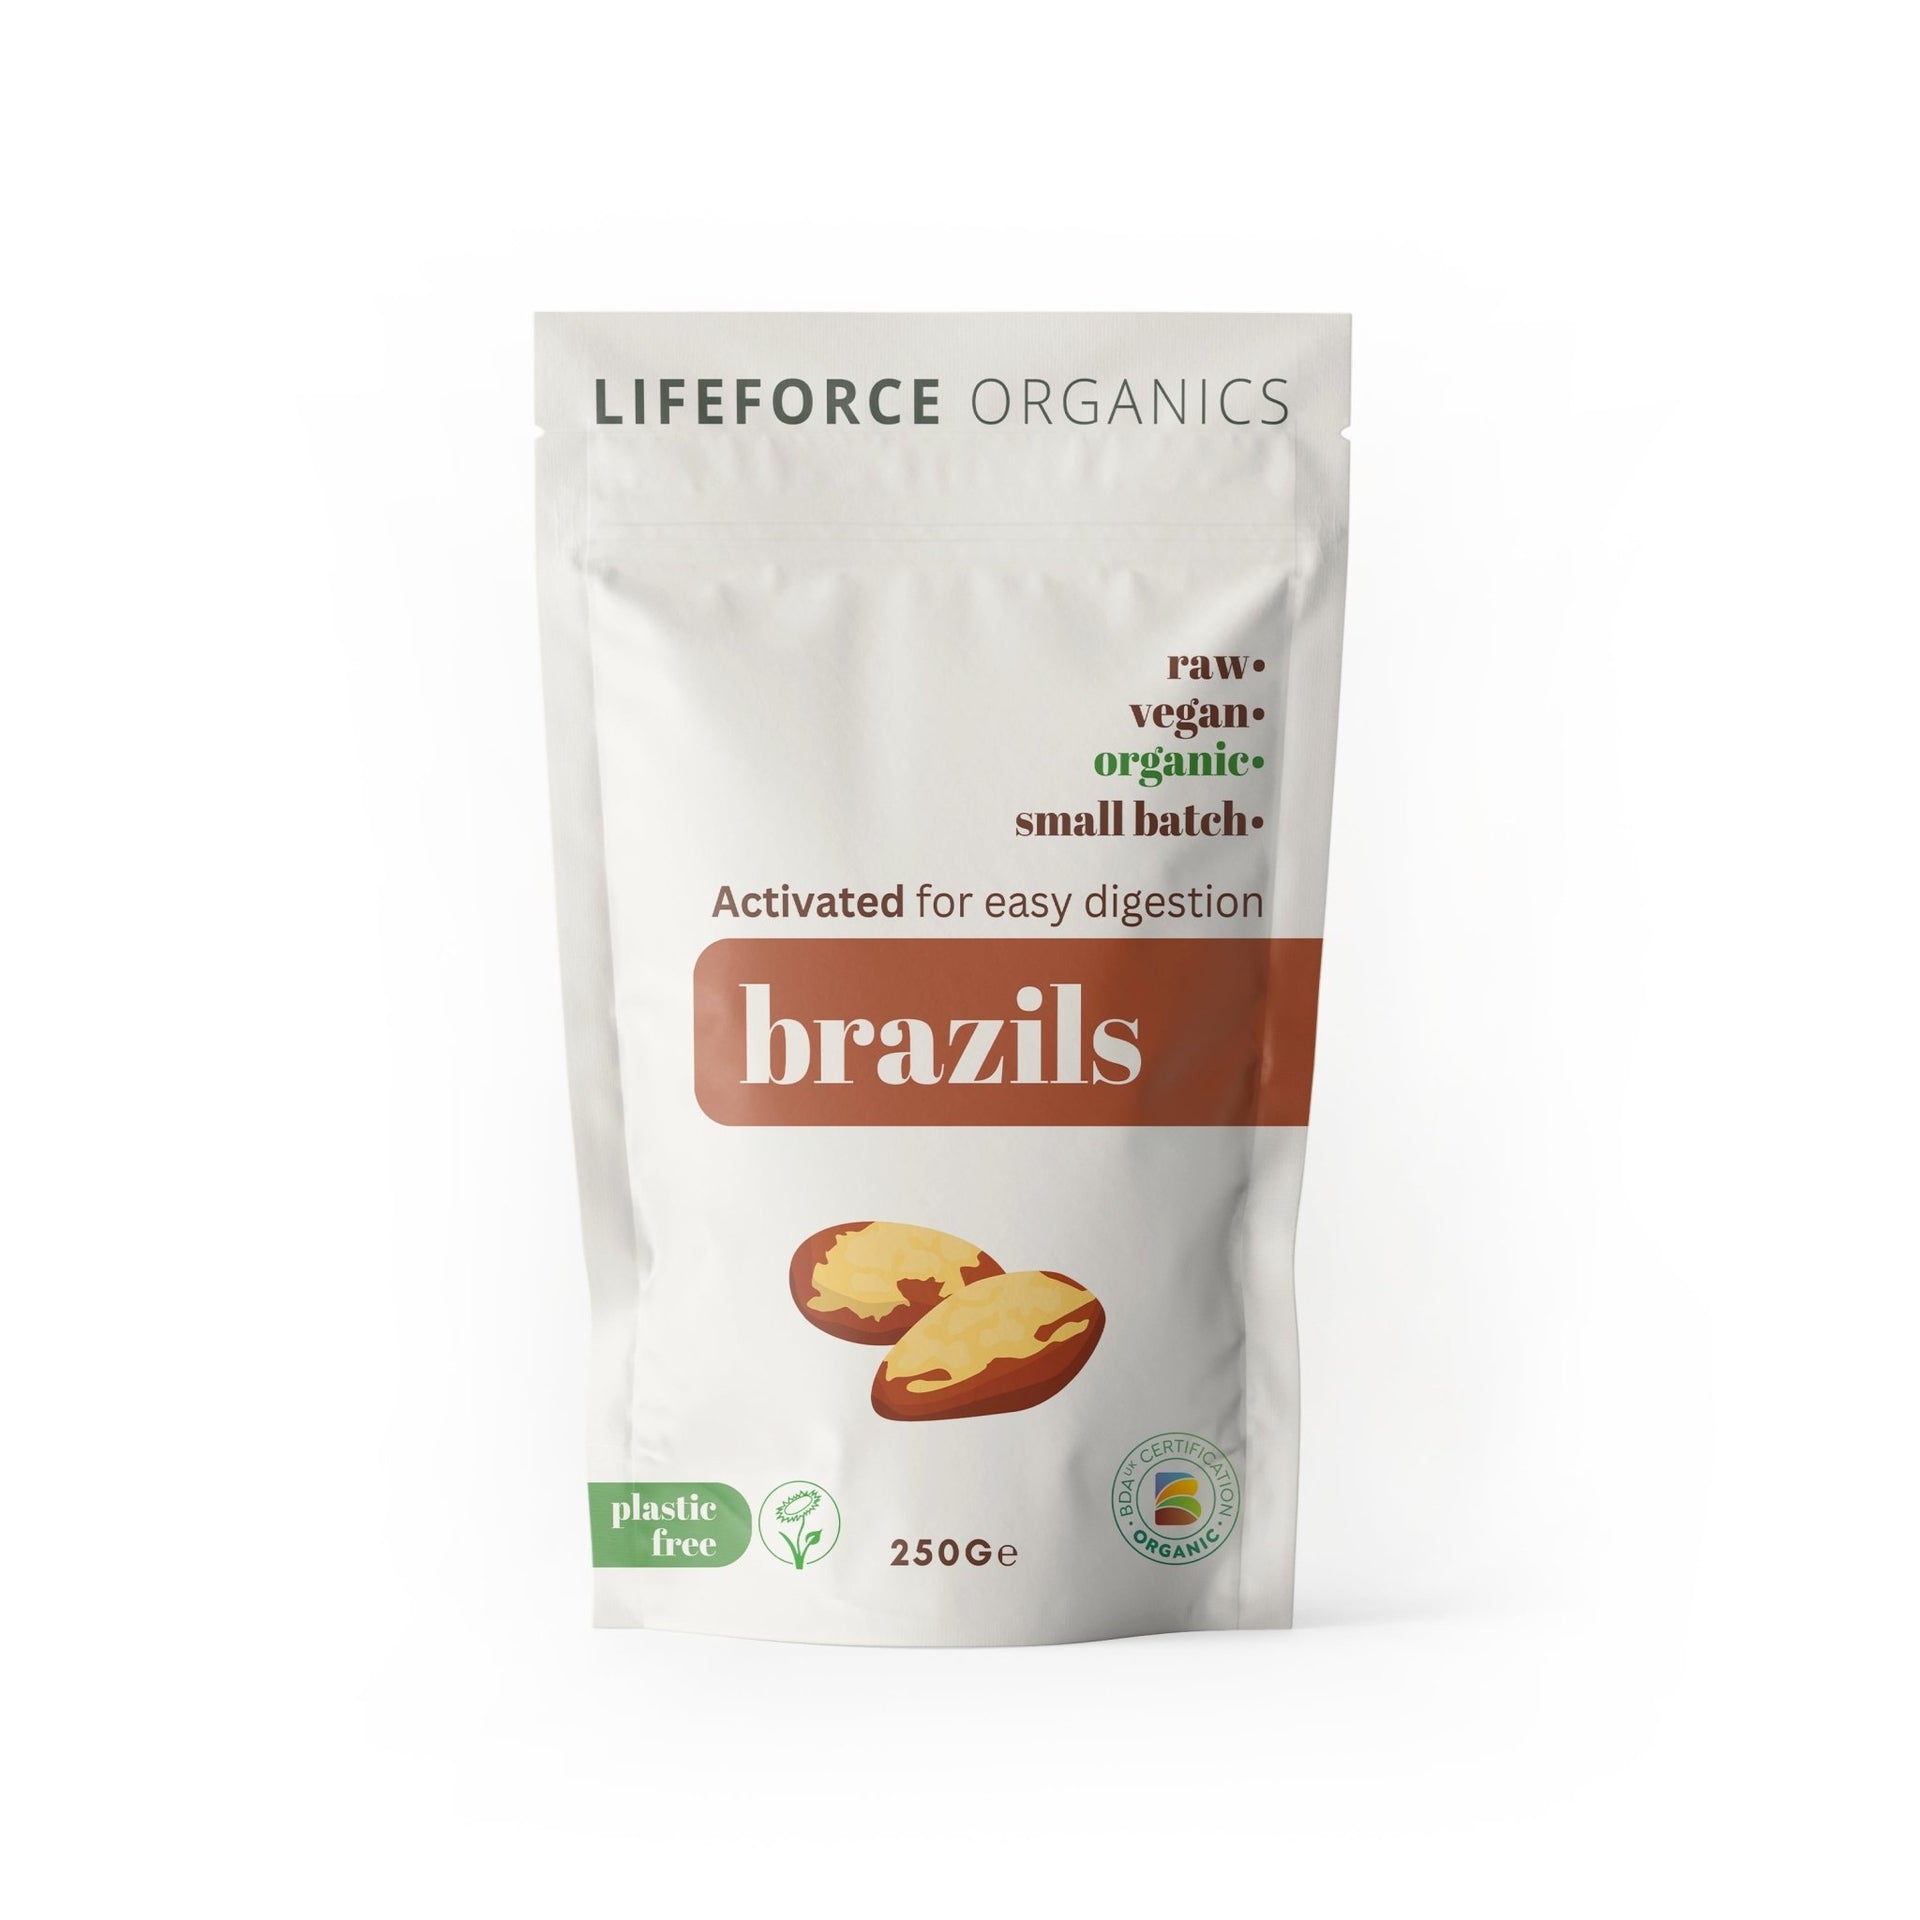 Food to Live, Organic Brazil Nuts, 2 Pounds, Raw 